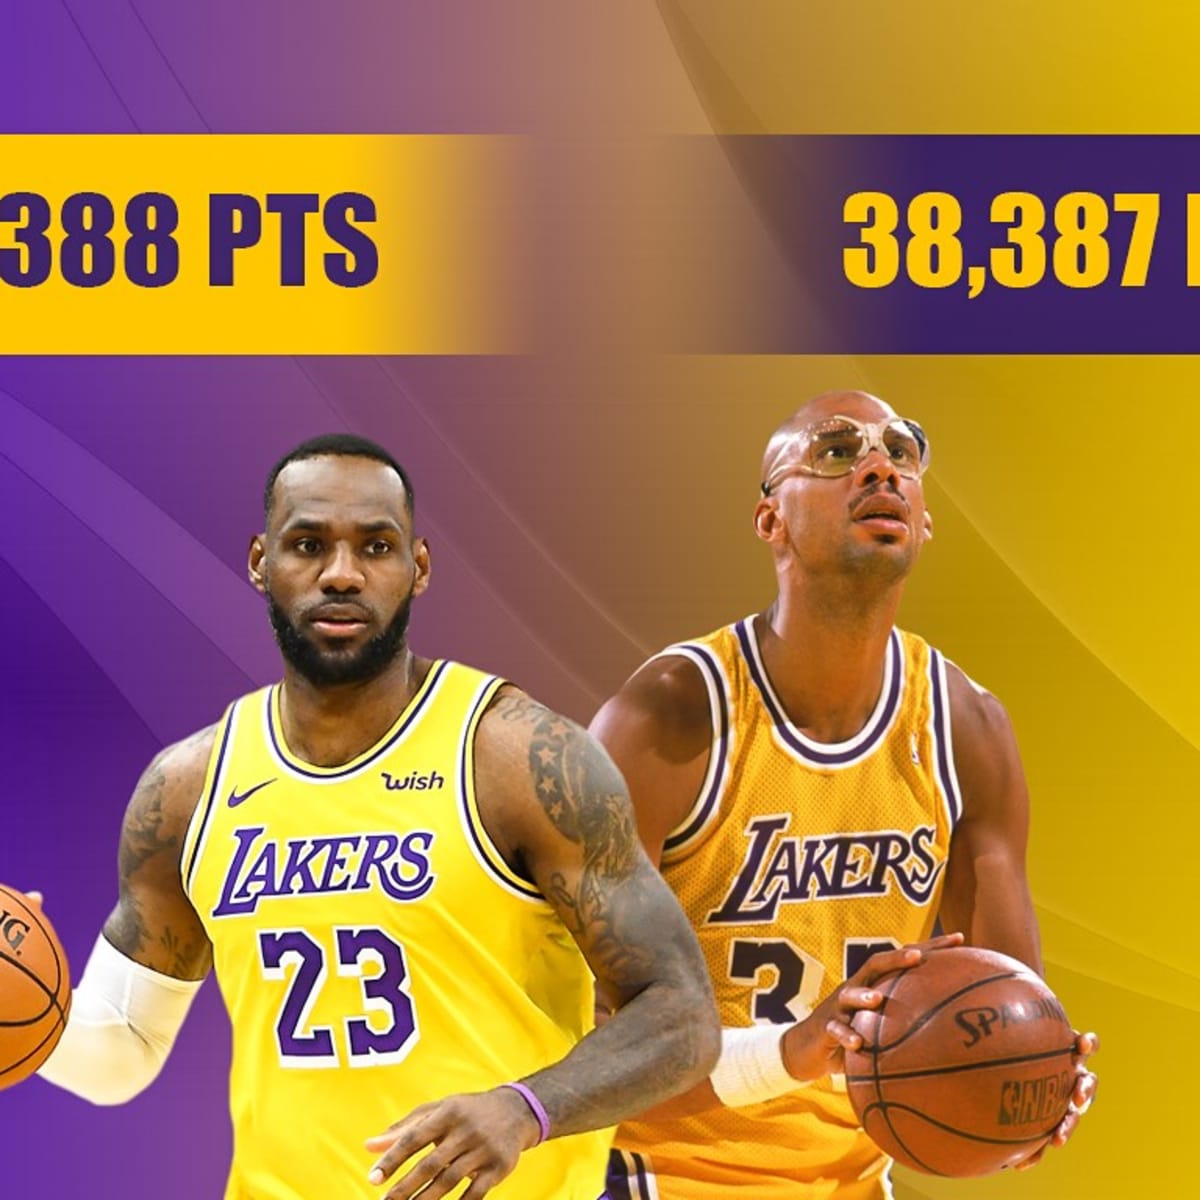 LeBron James is about to pass Kareem Abdul-Jabbar. Is he passing